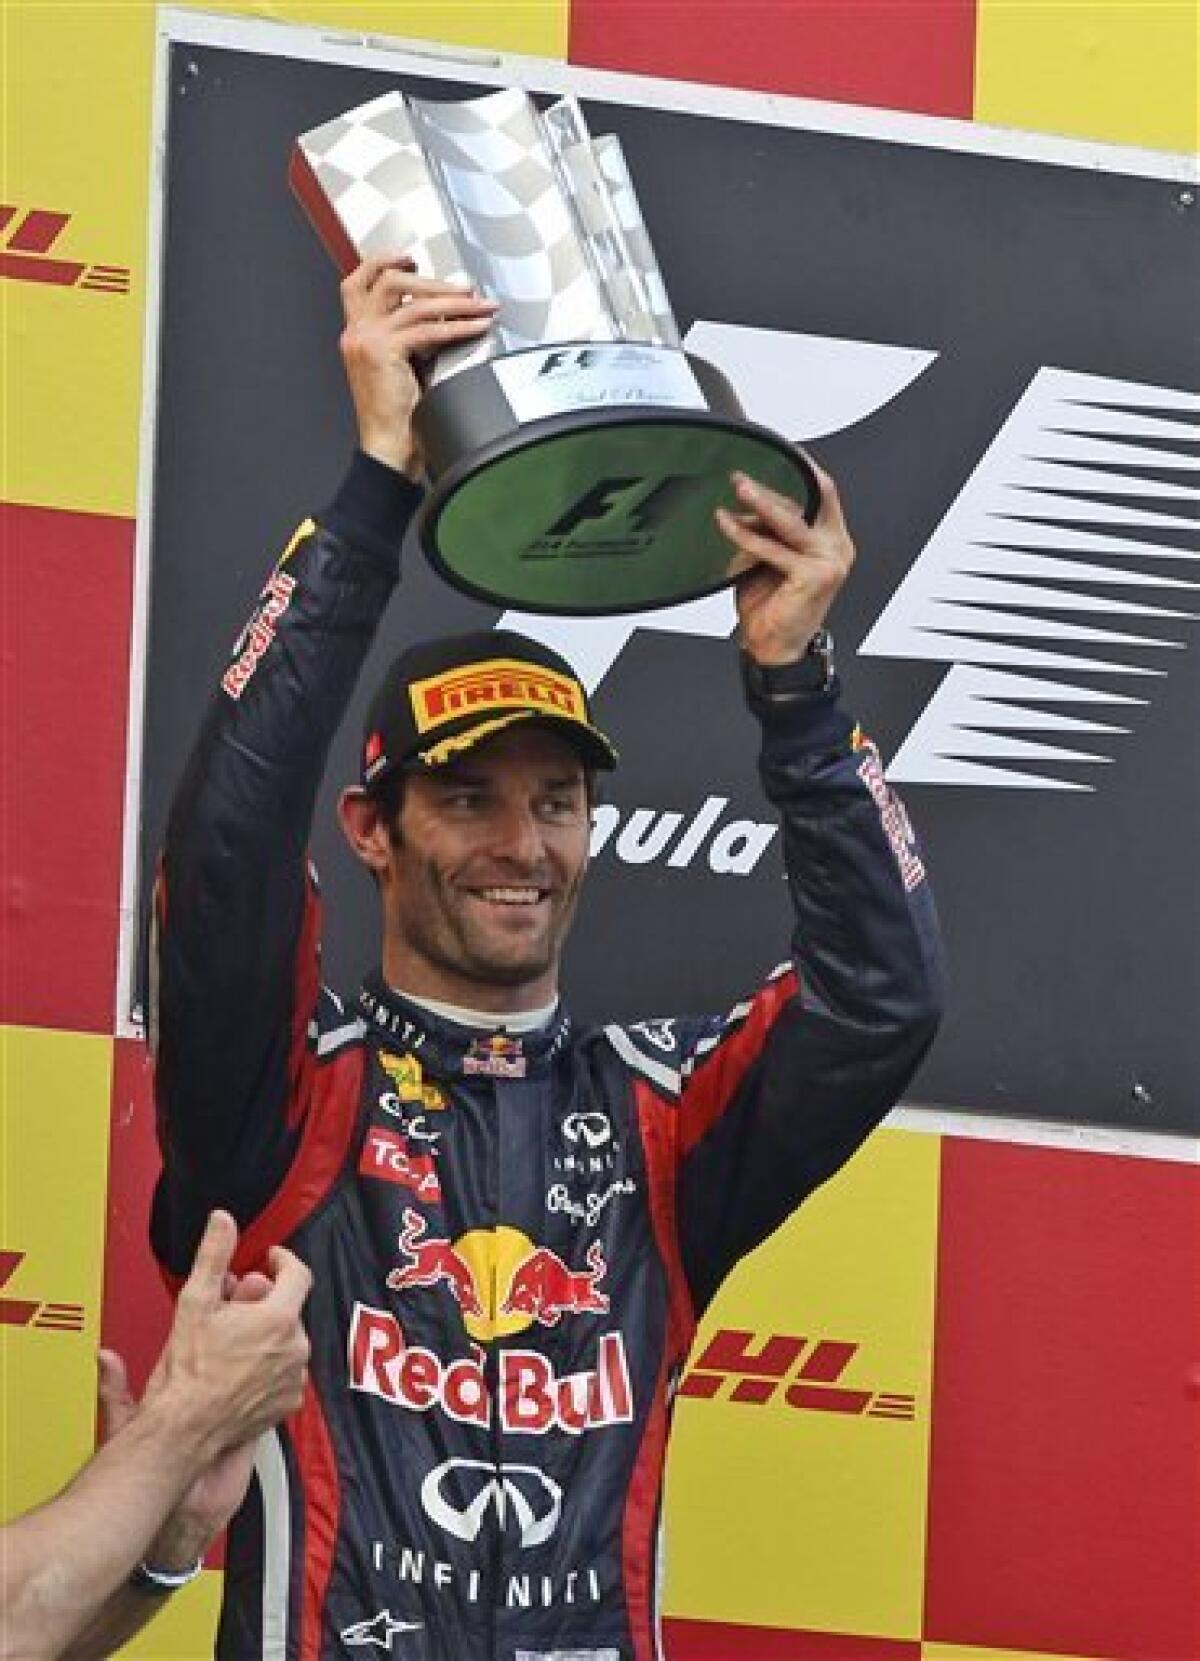 World Champion Vettel and Red Bull receive 2012 rewards in Istanbul